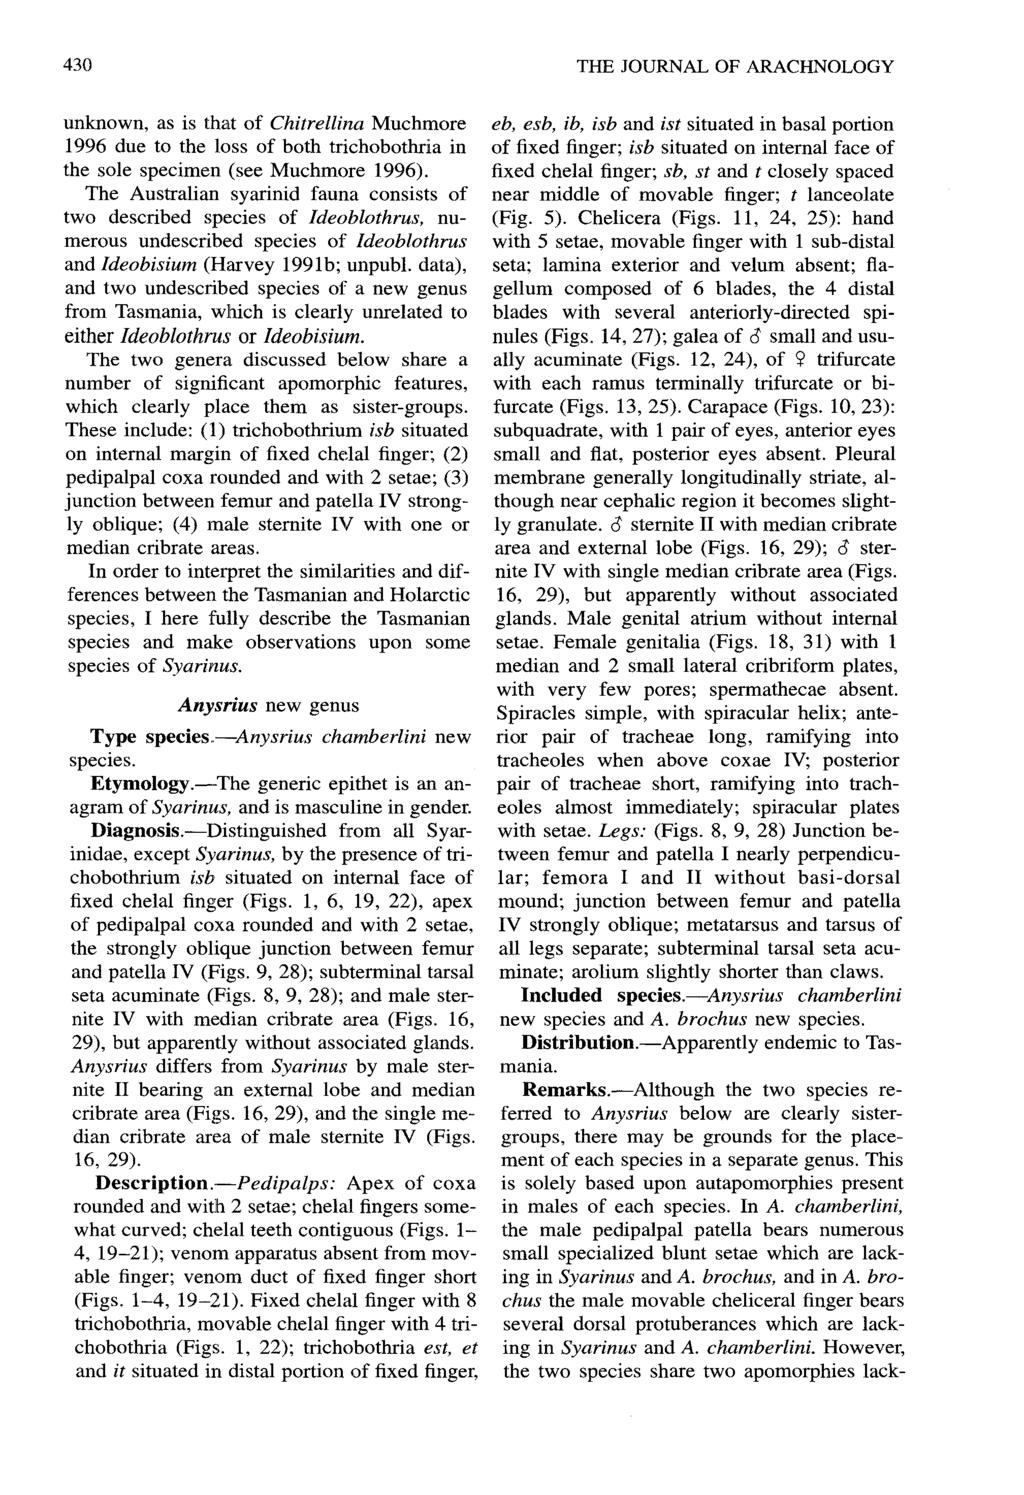 430 THE JOURNAL OF ARACHNOLOGY unknown, as is that of Chitrellina Muchmore 1996 due to the loss of both trichobothria in the sole specimen (see Muchmore 1996).